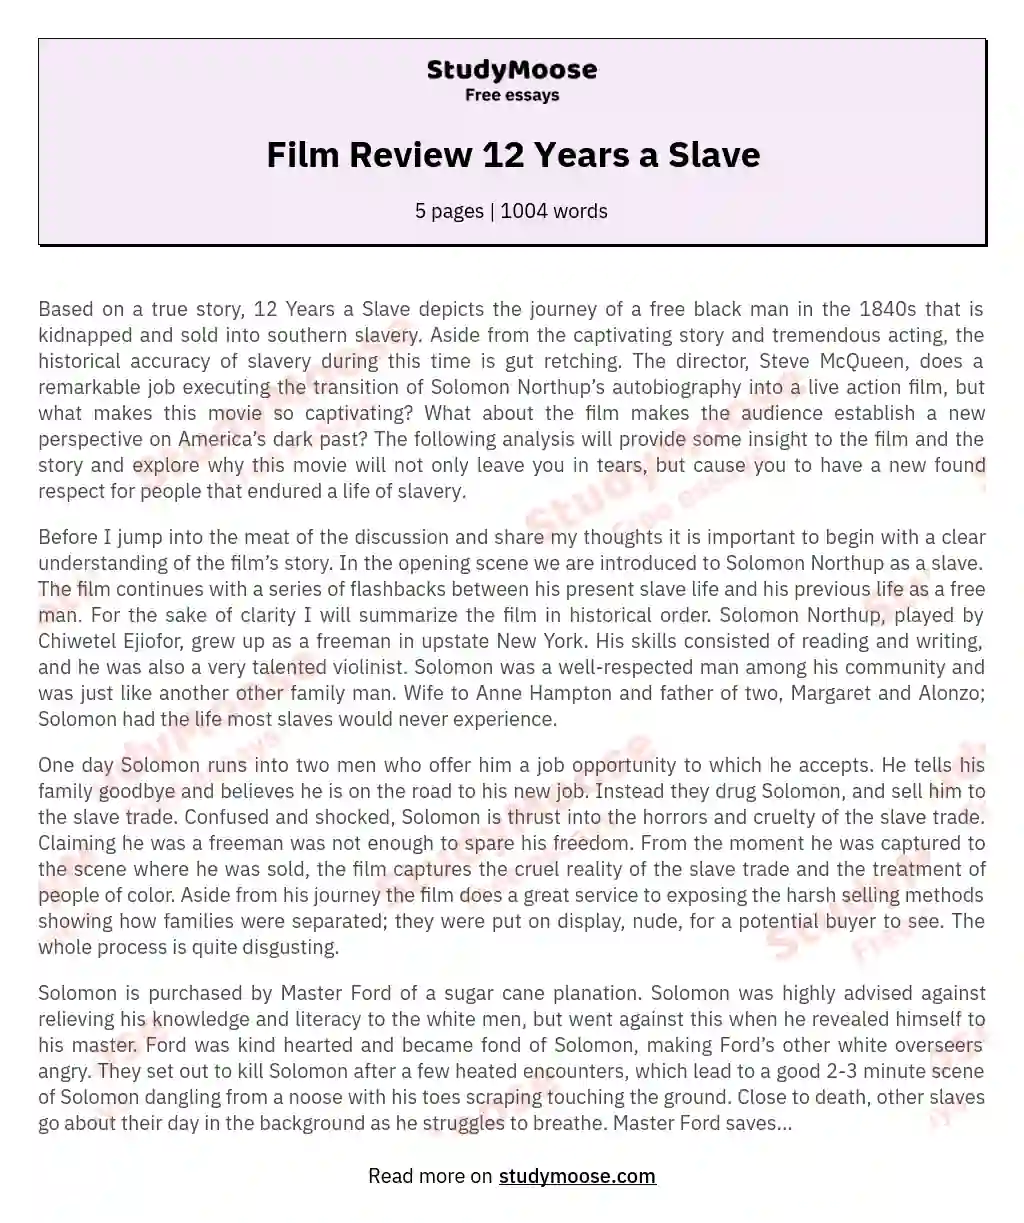 Film Review 12 Years a Slave essay